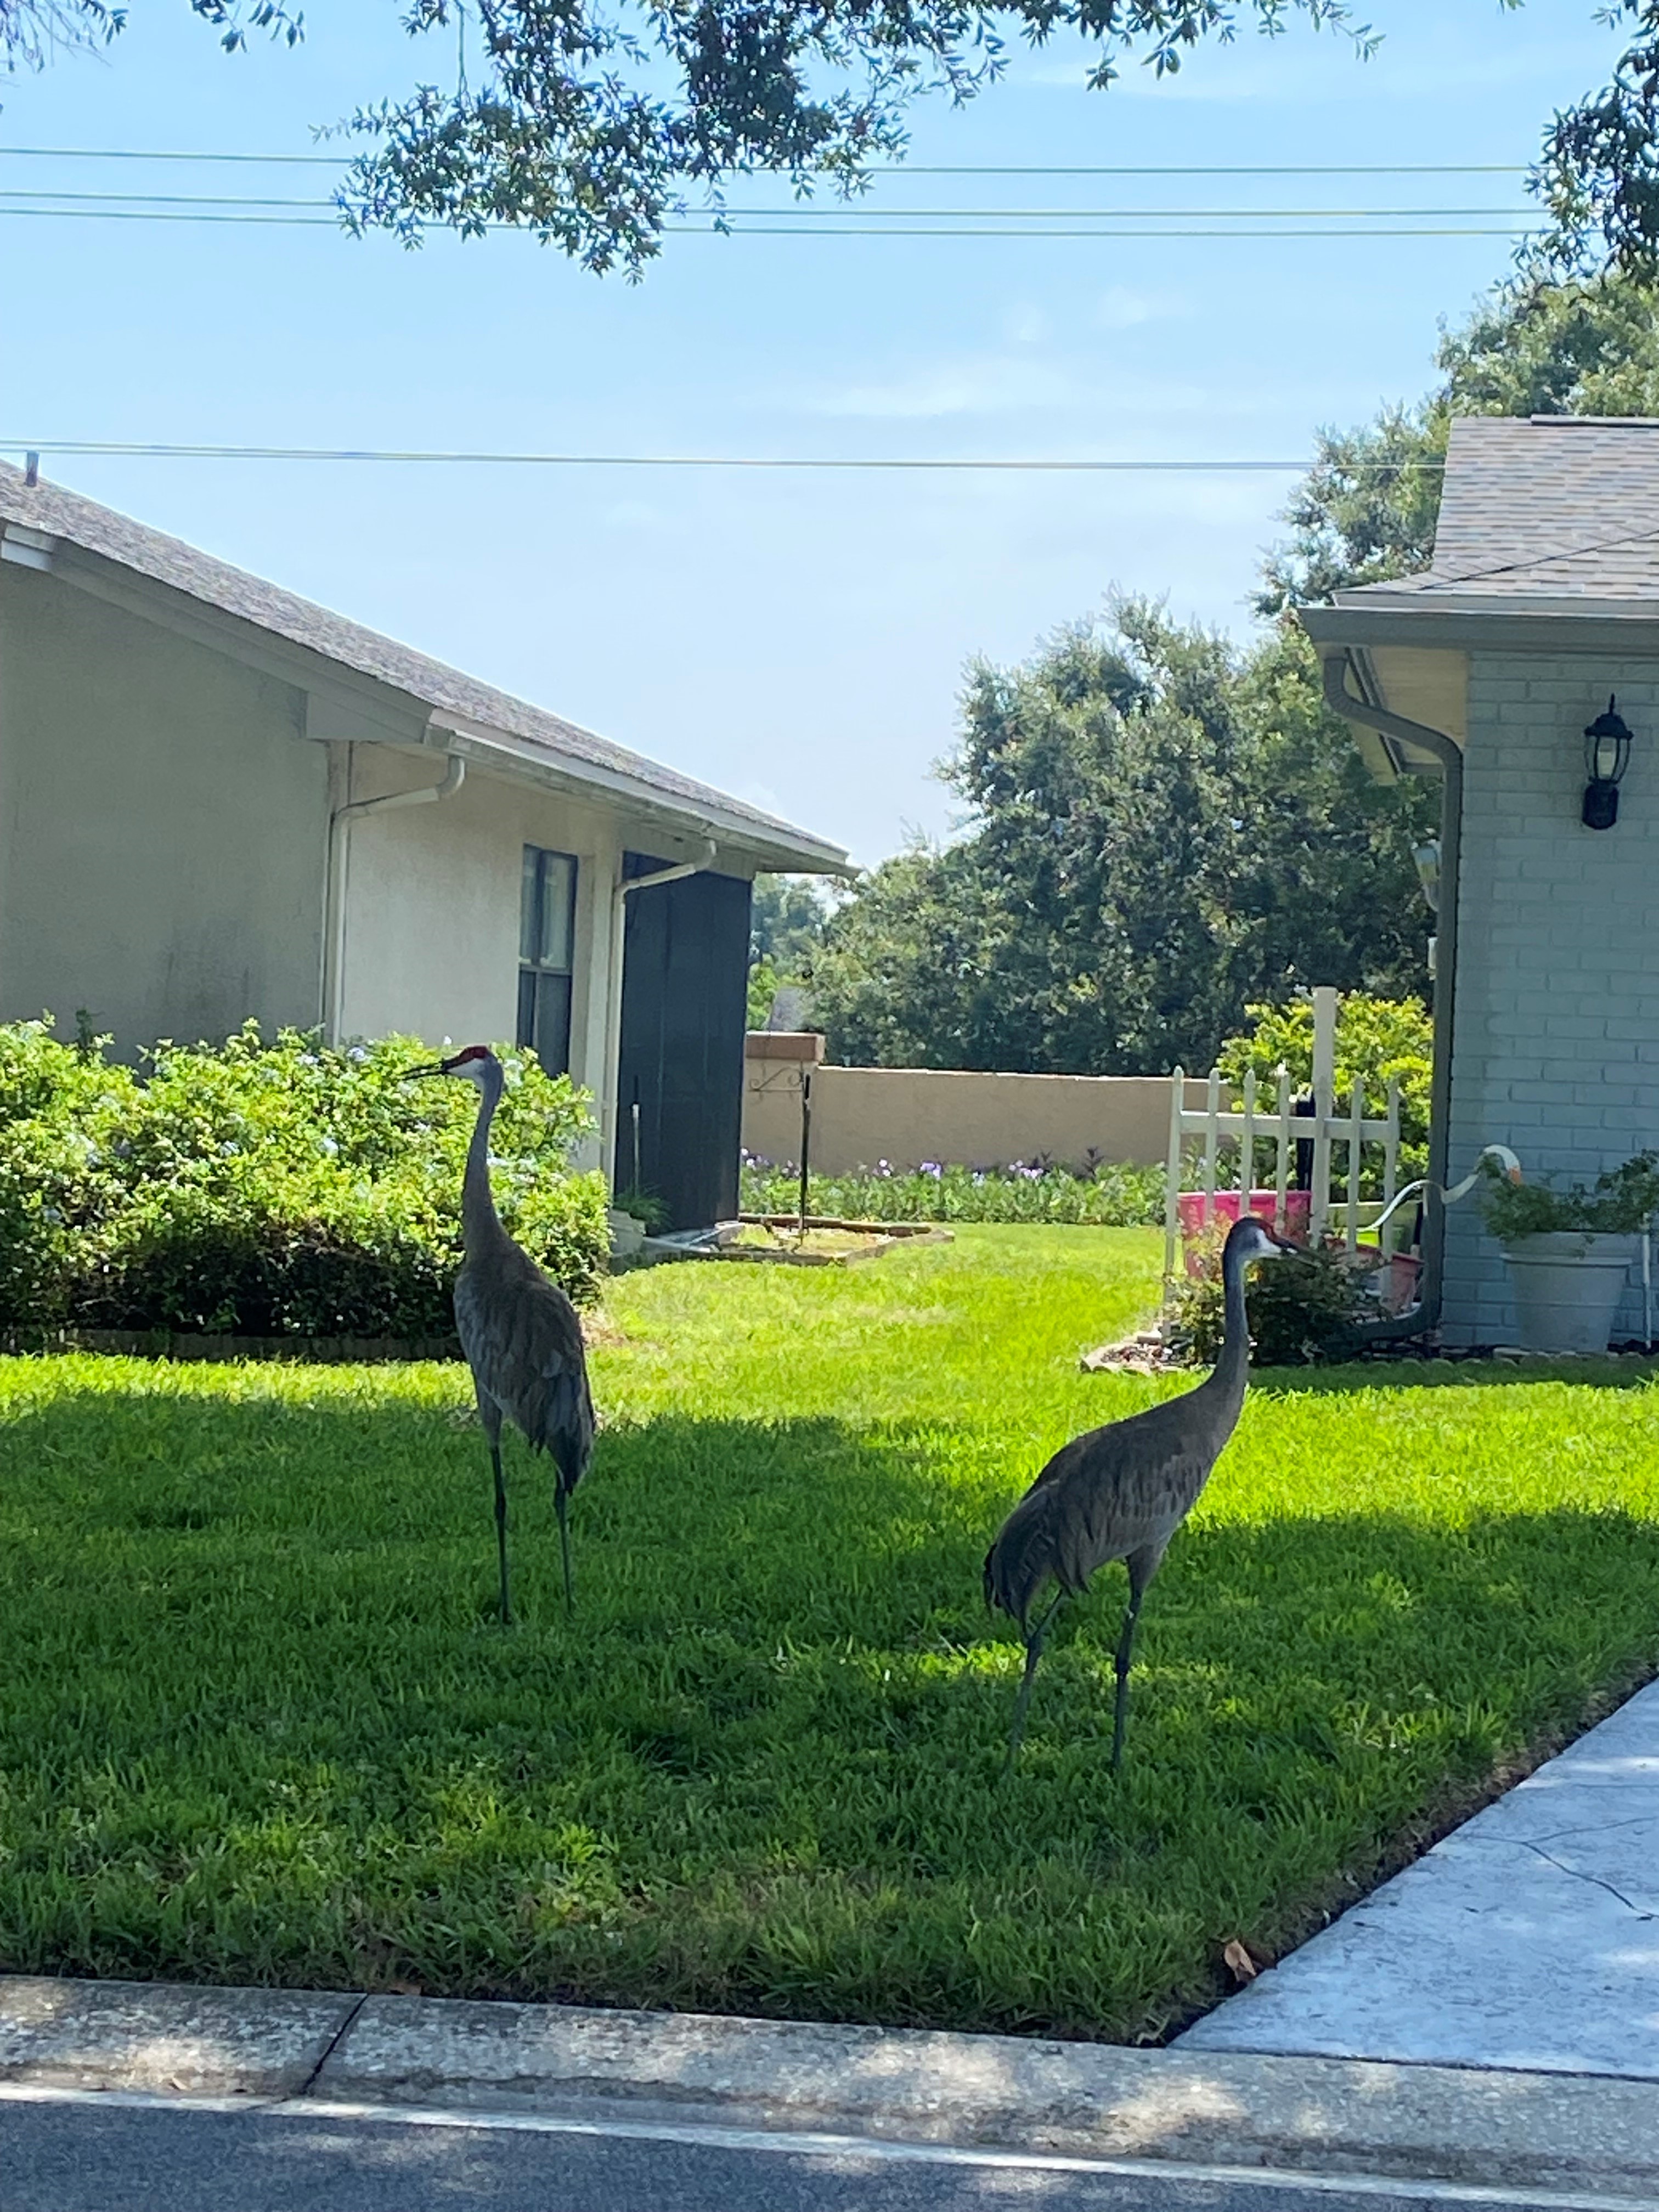 You can find Sandhill Cranes throughout the Sandpiper community.